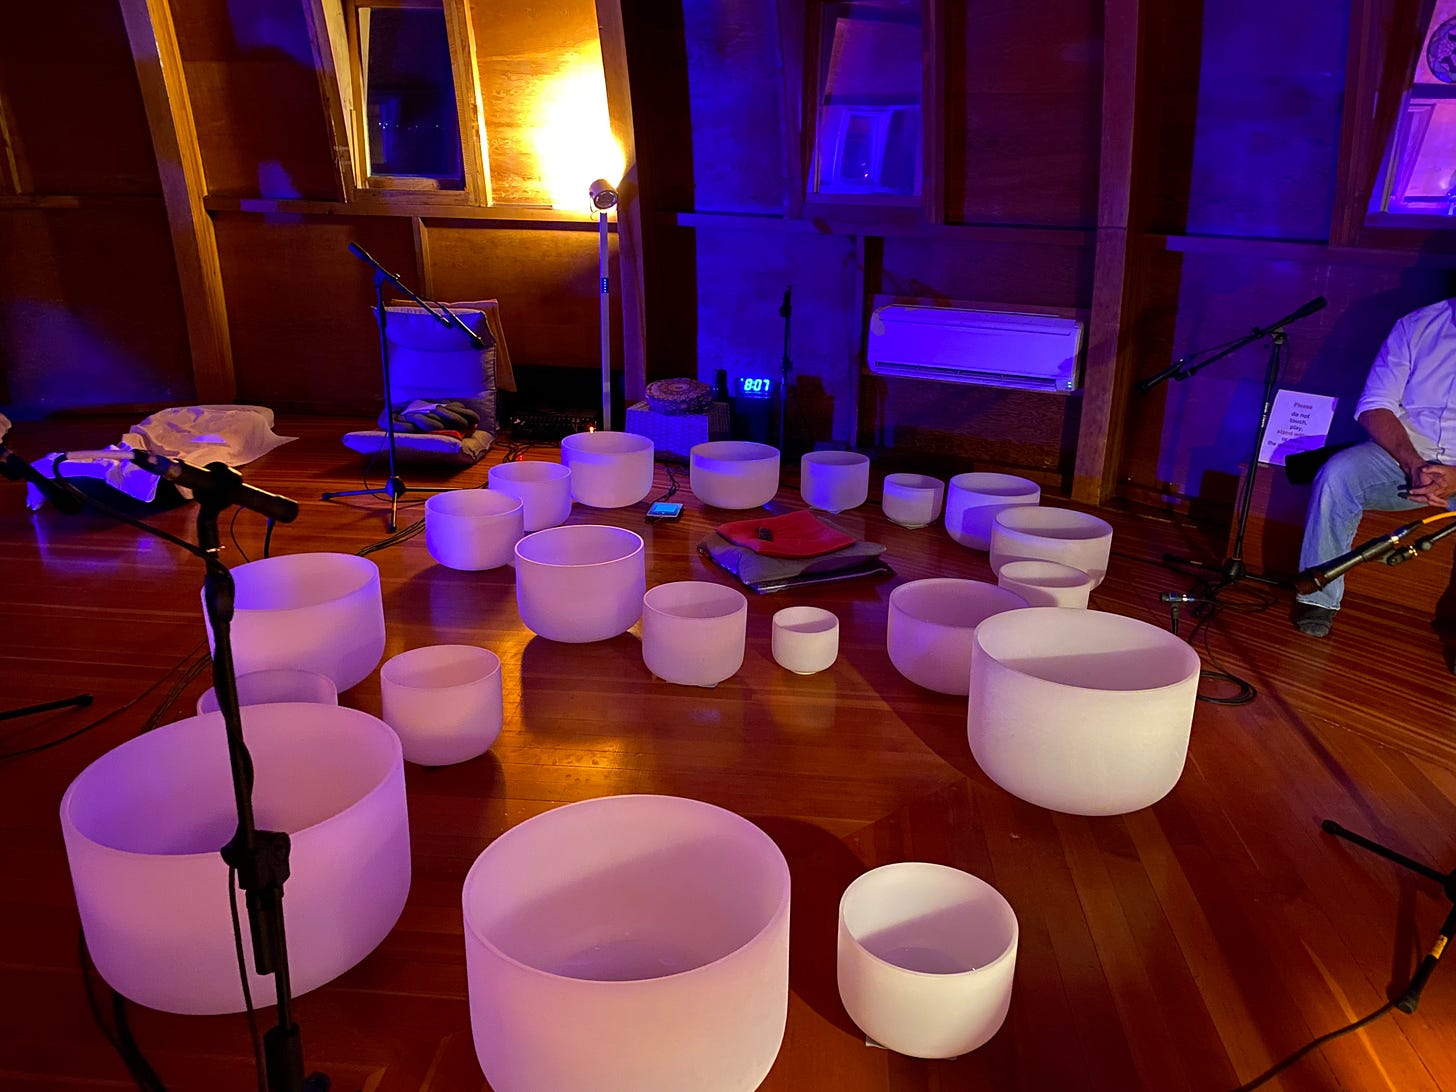 White crystal singing bowls lay on a wooden floor.